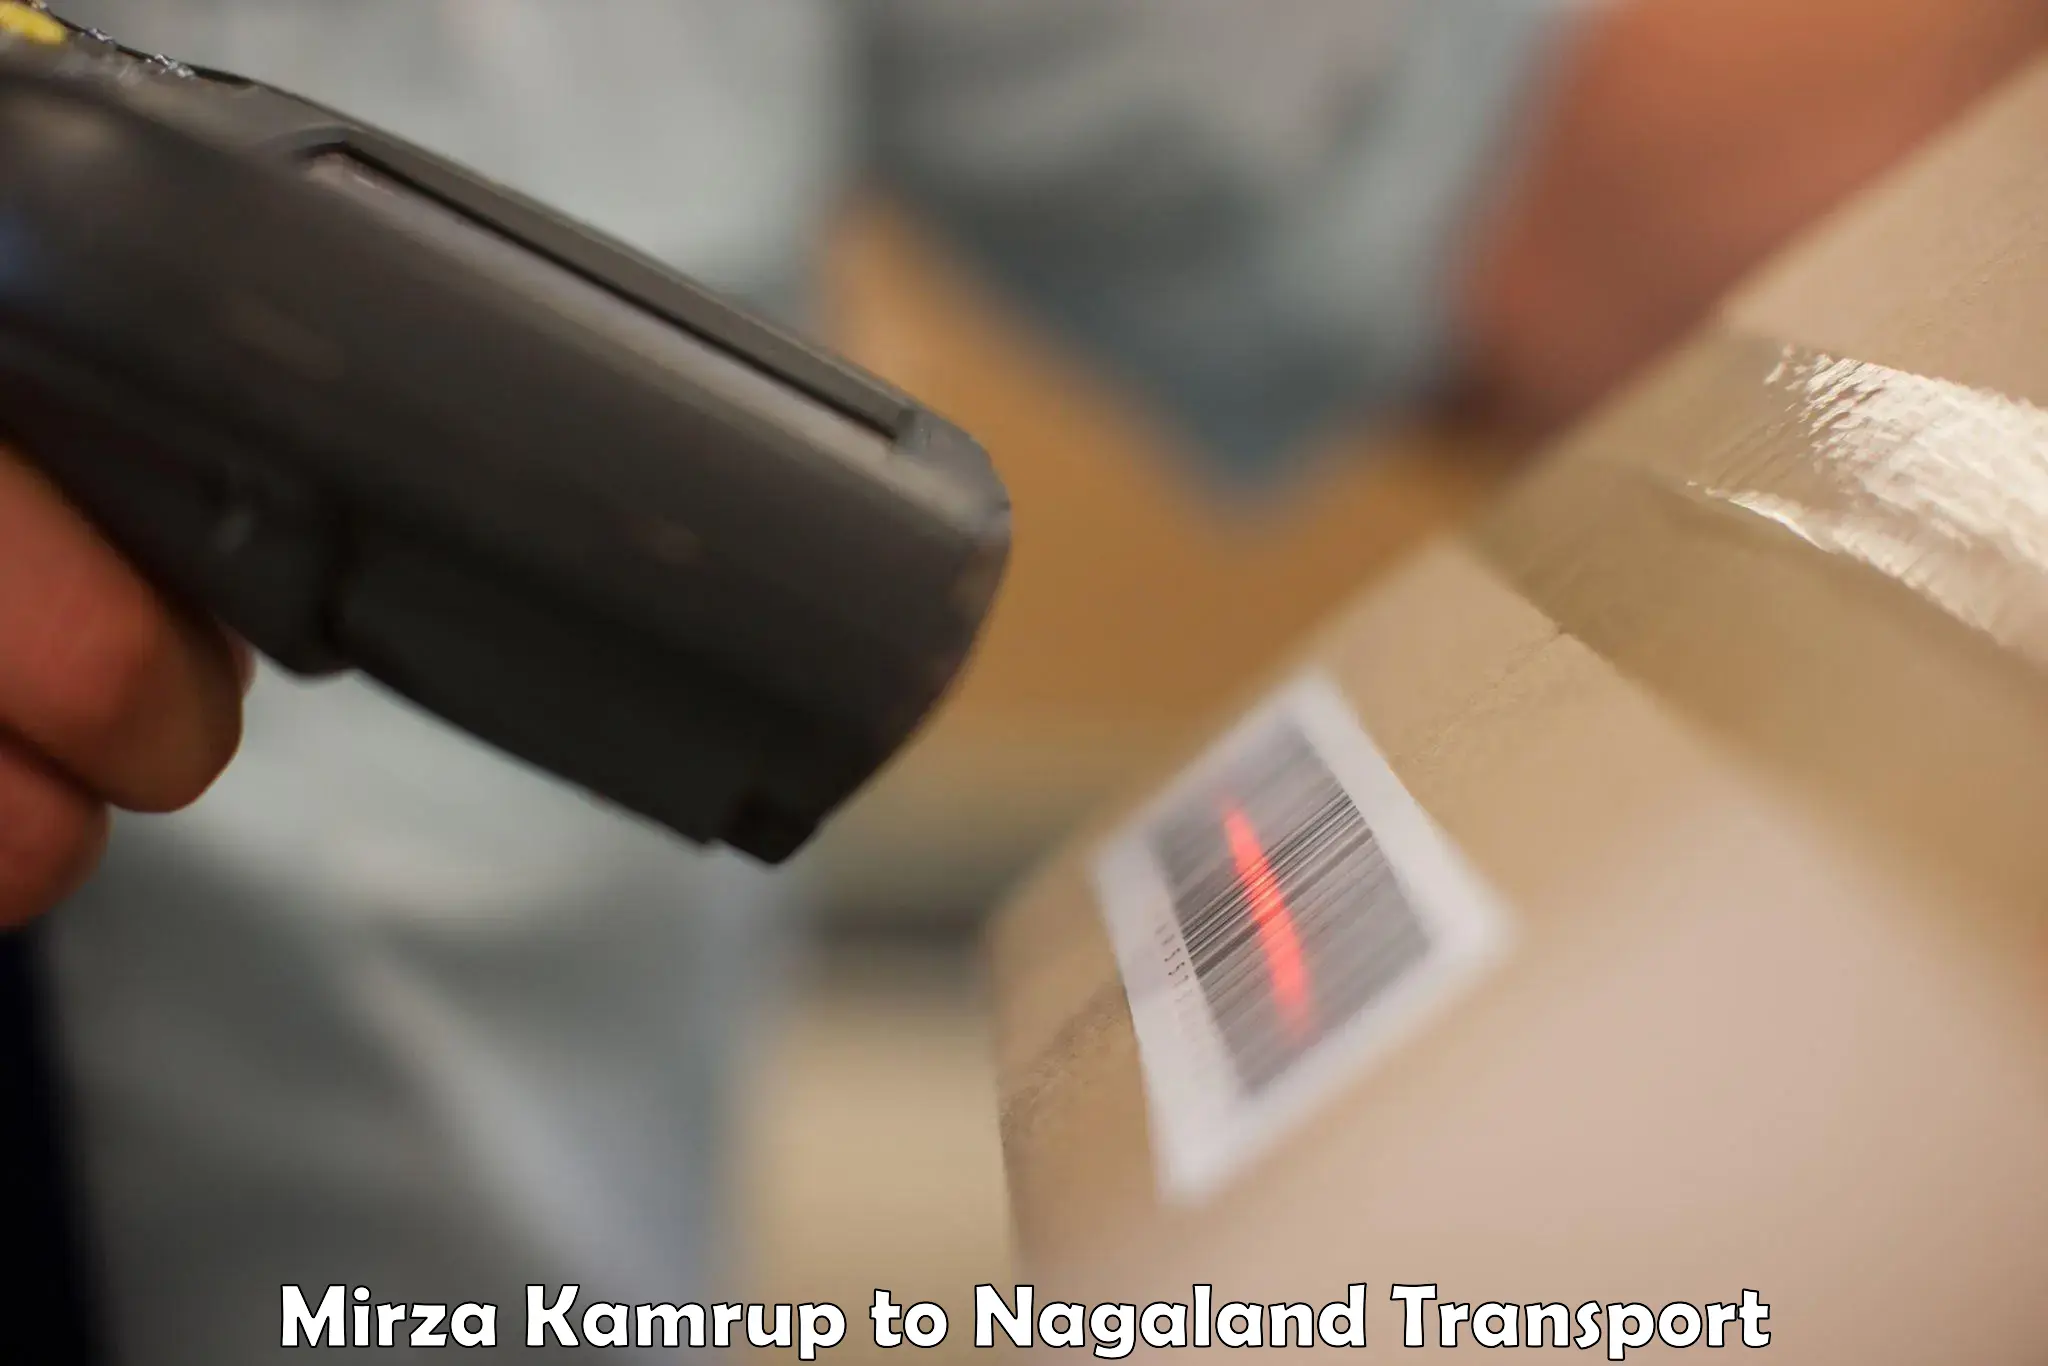 Nationwide transport services Mirza Kamrup to Dimapur